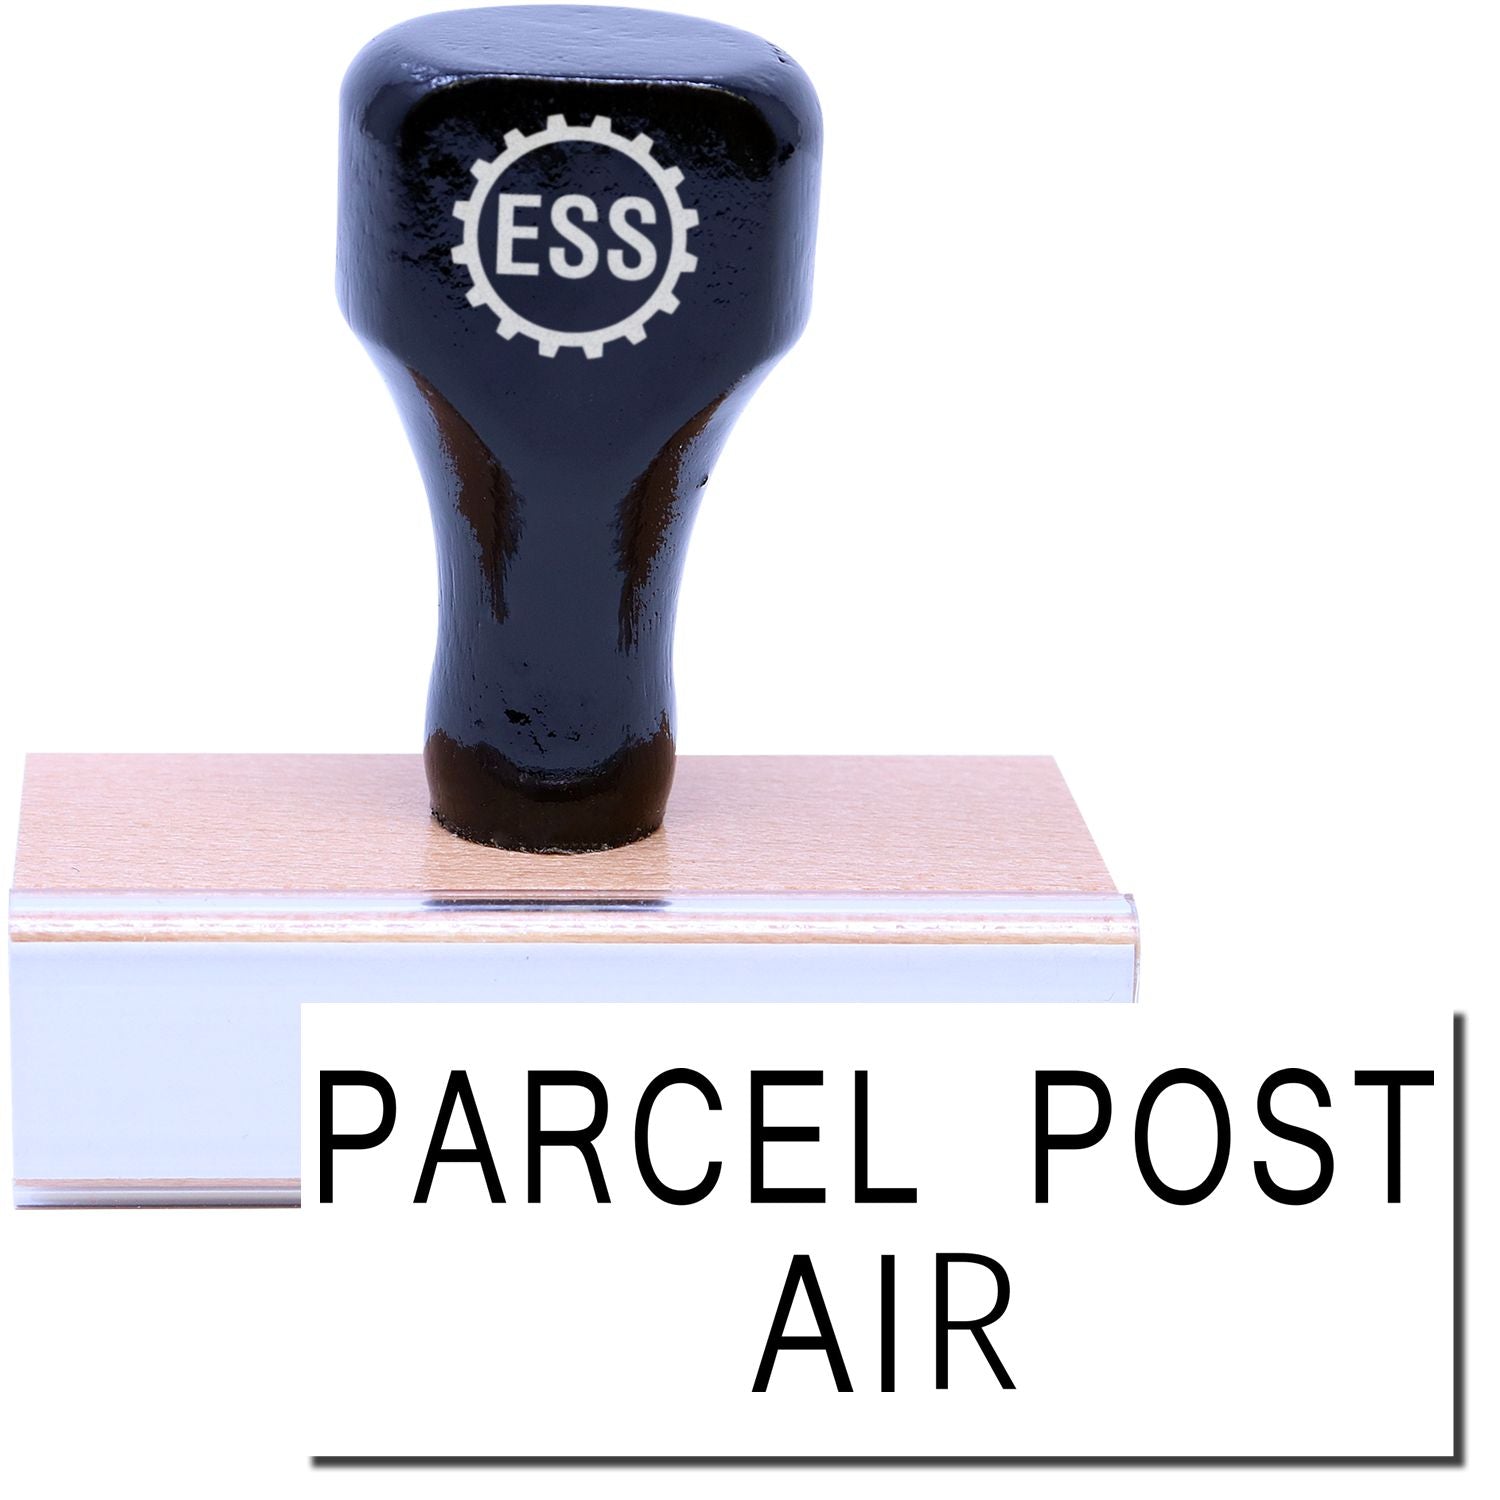 A stock office rubber stamp with a stamped image showing how the text "PARCEL POST AIR" is displayed after stamping.